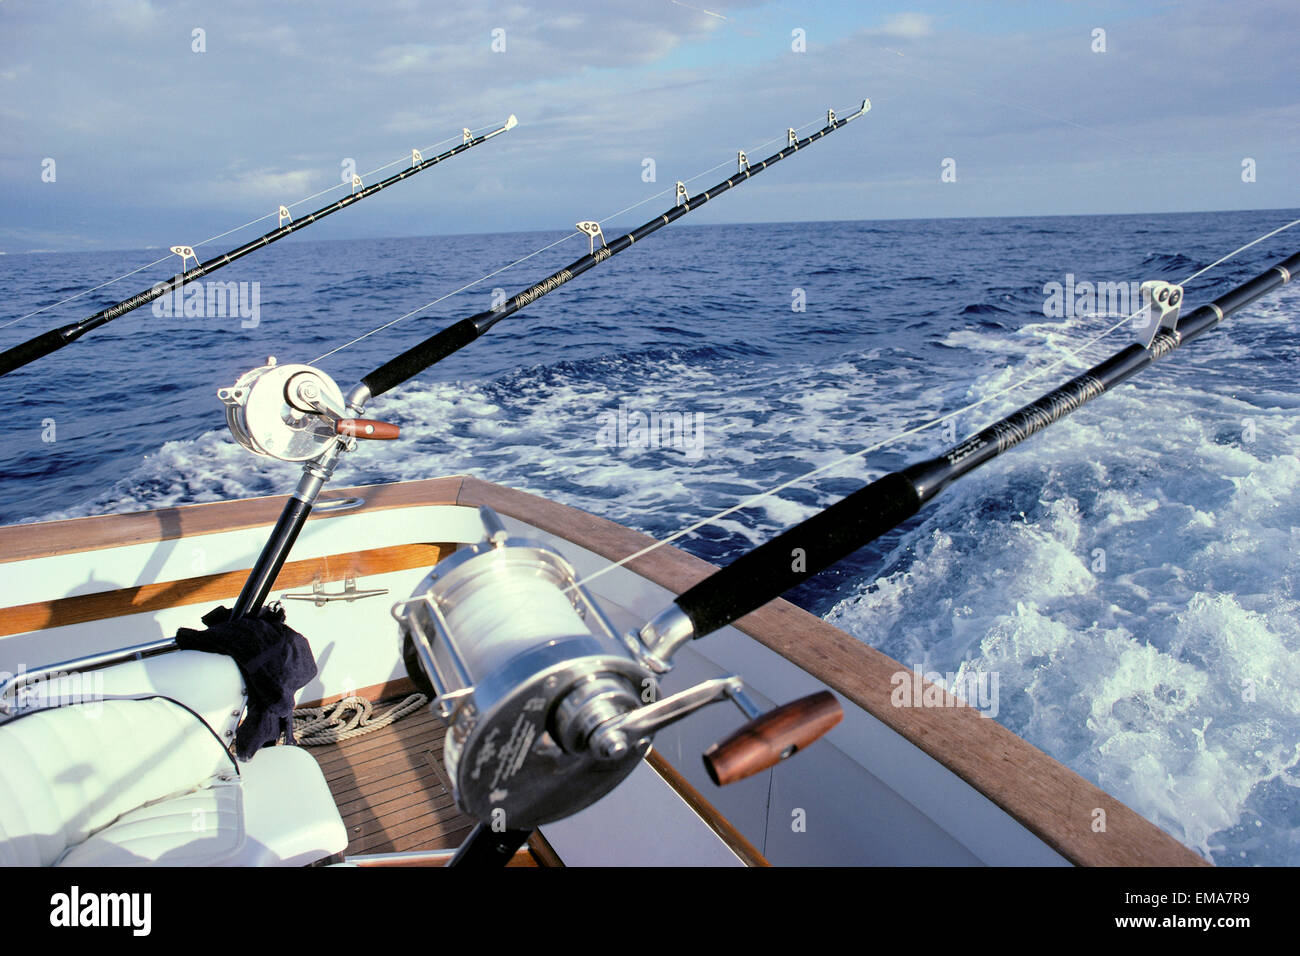 Hawaii, Close-Up Of Fishing Rods And Reels On A Boat Deep Sea Fishing C1376  Stock Photo - Alamy